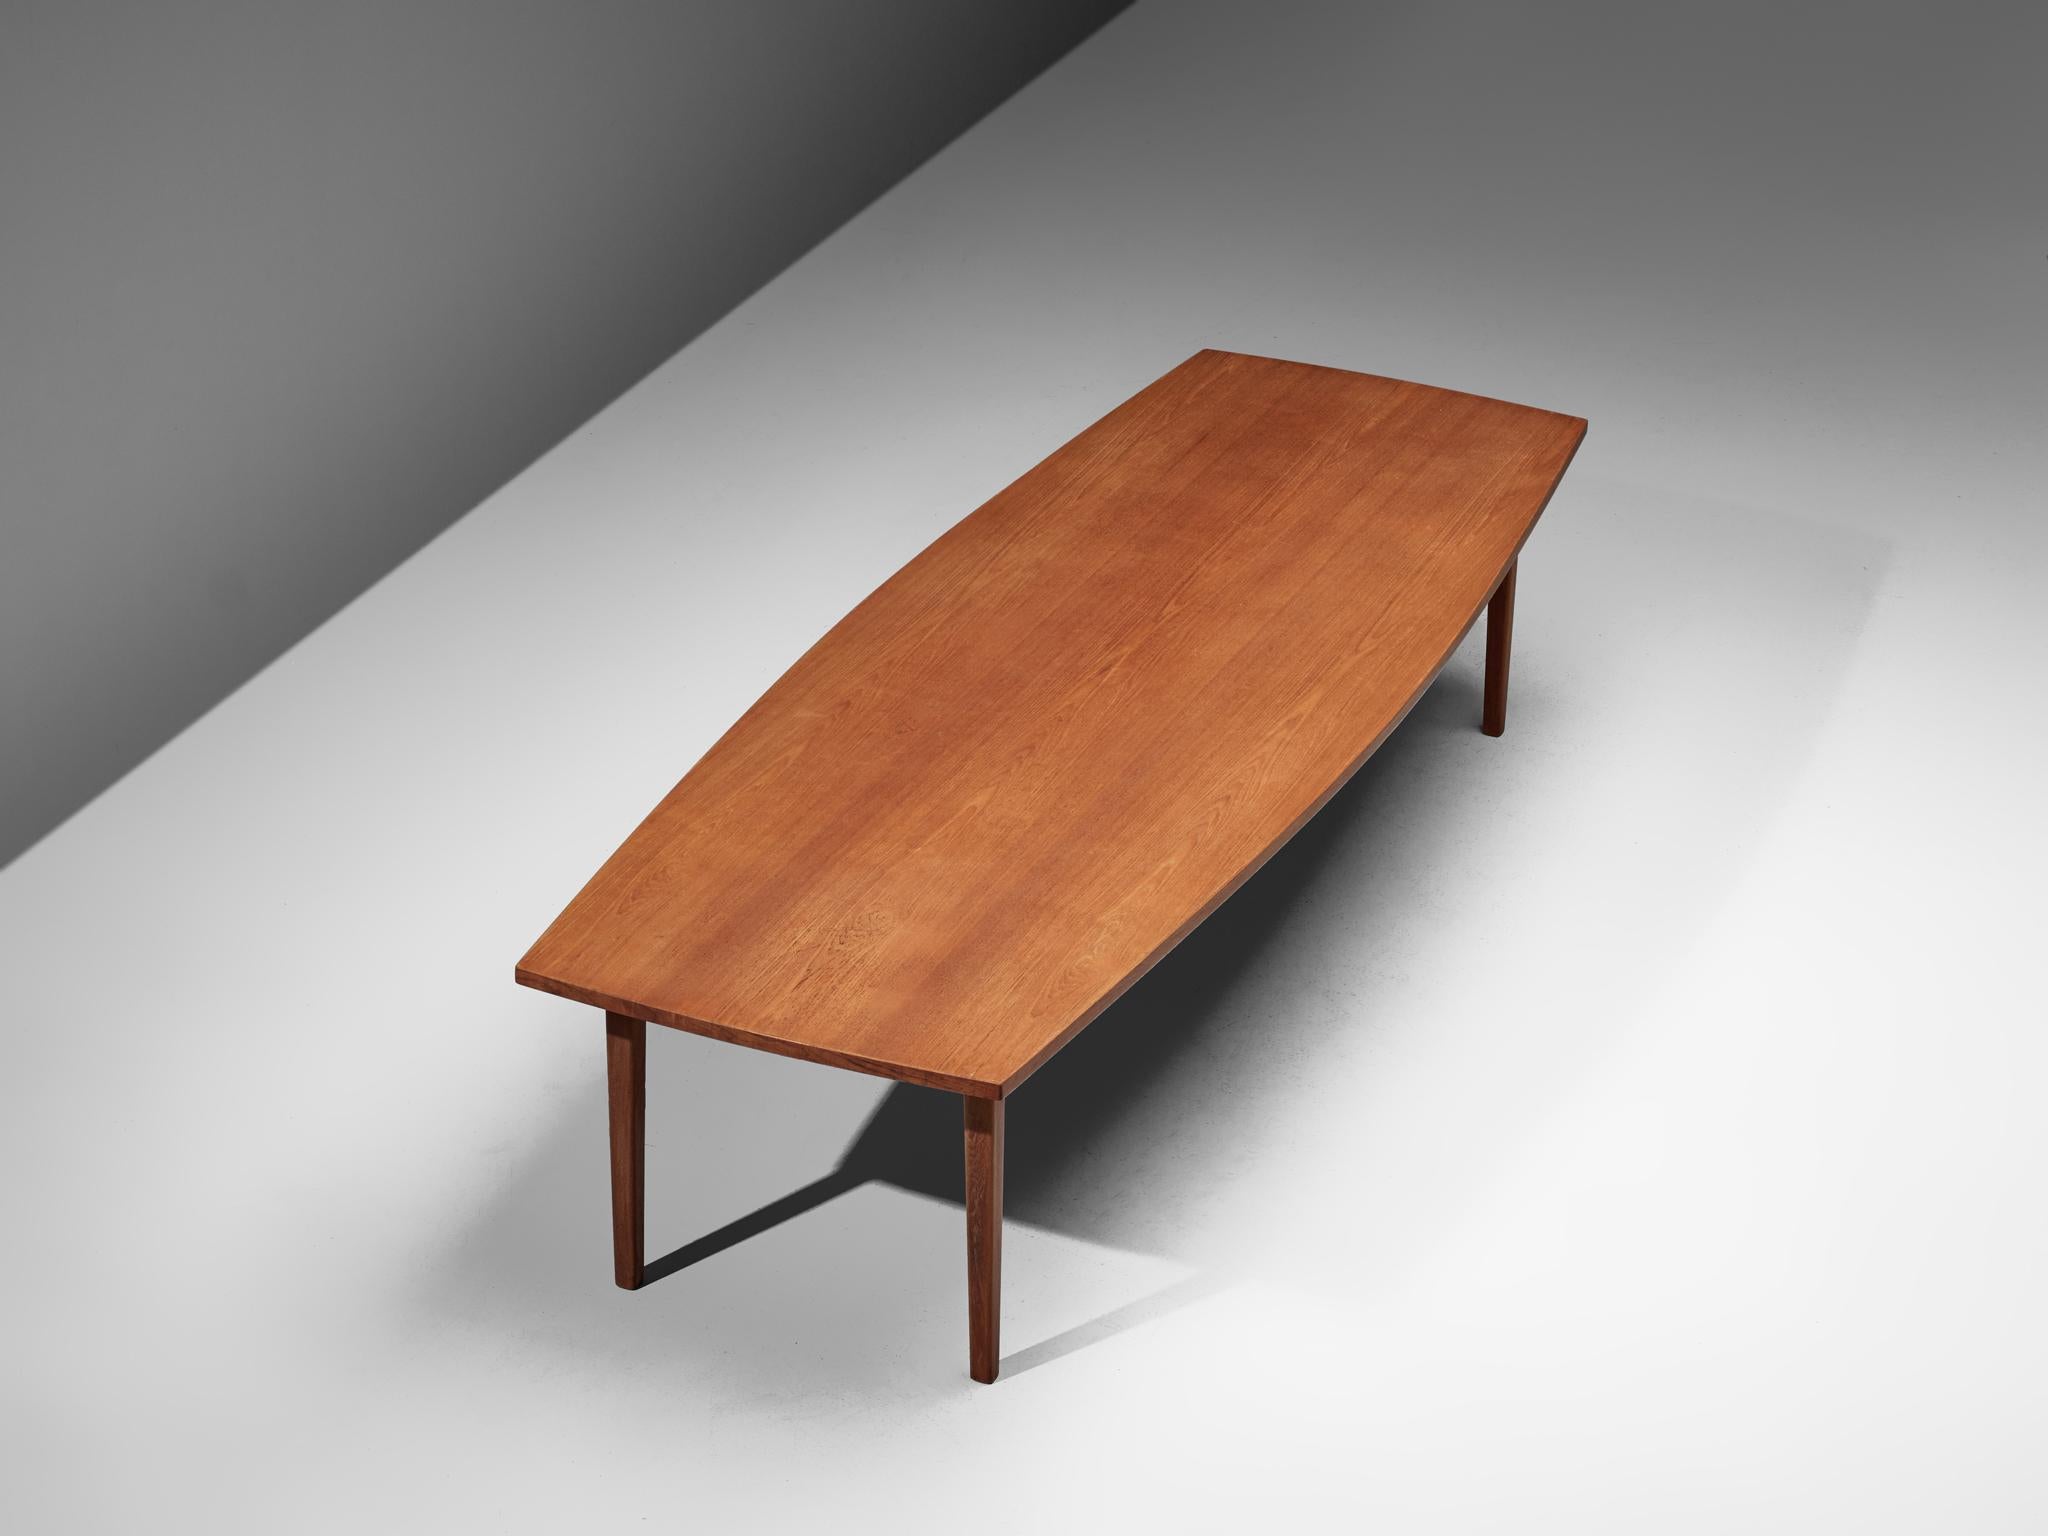 Conference table, in teak and beech, Denmark, 1950s.

A 3.6mtr/140in large dining table in teak. The boat-shaped tabletop is made out of one piece, featuring a beautiful grain. The base consists of eight conical legs and shows beautiful straight